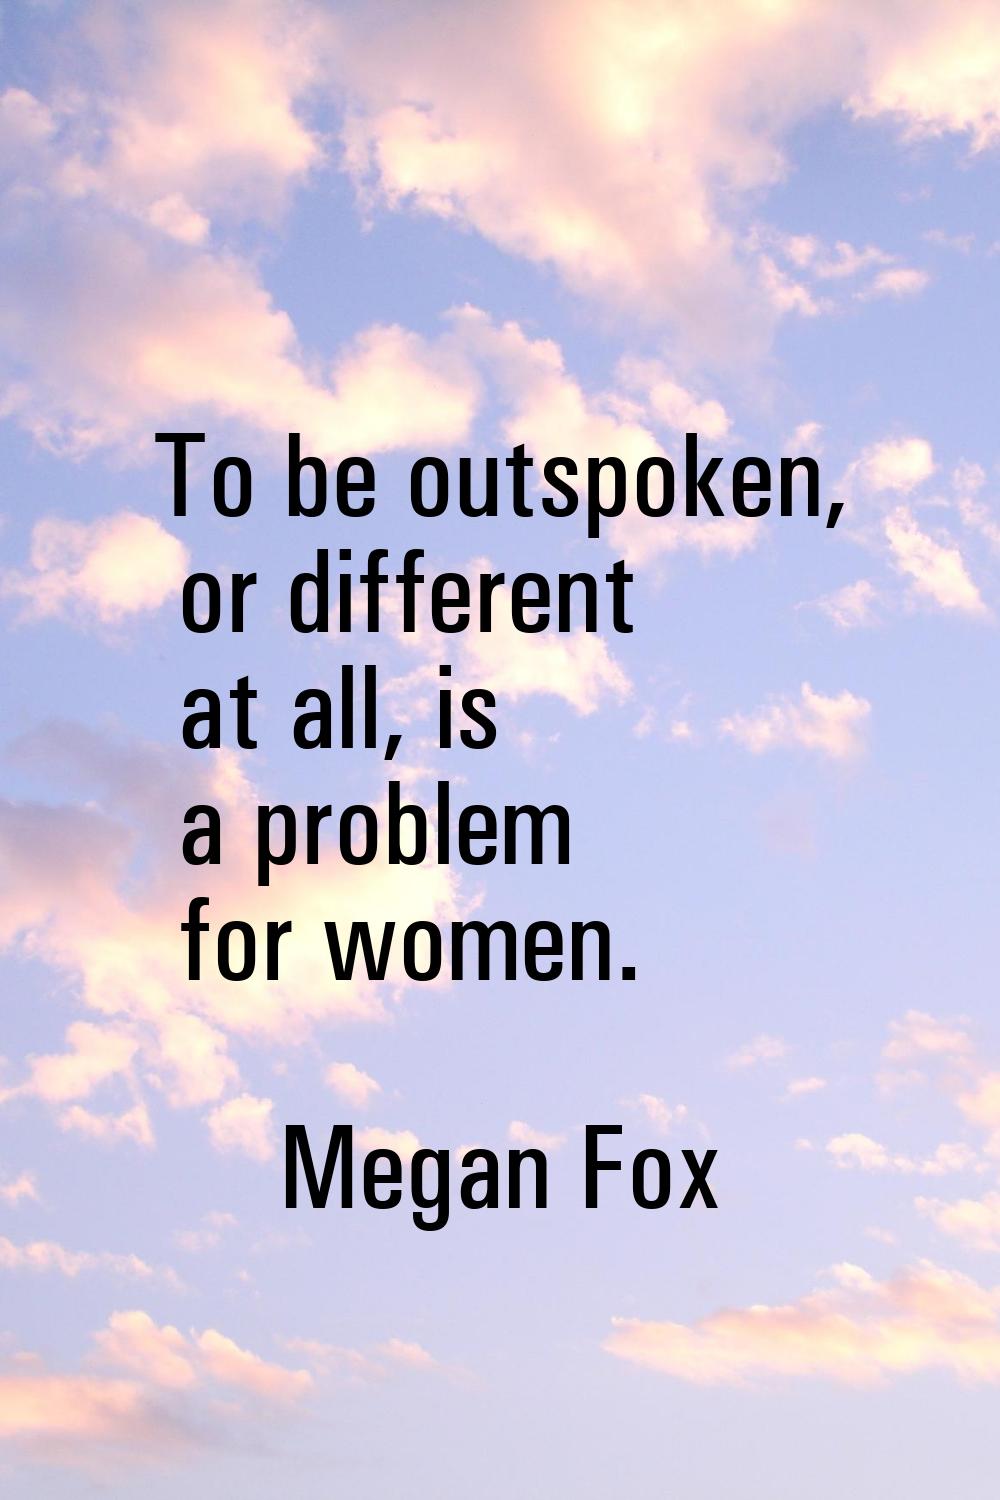 To be outspoken, or different at all, is a problem for women.